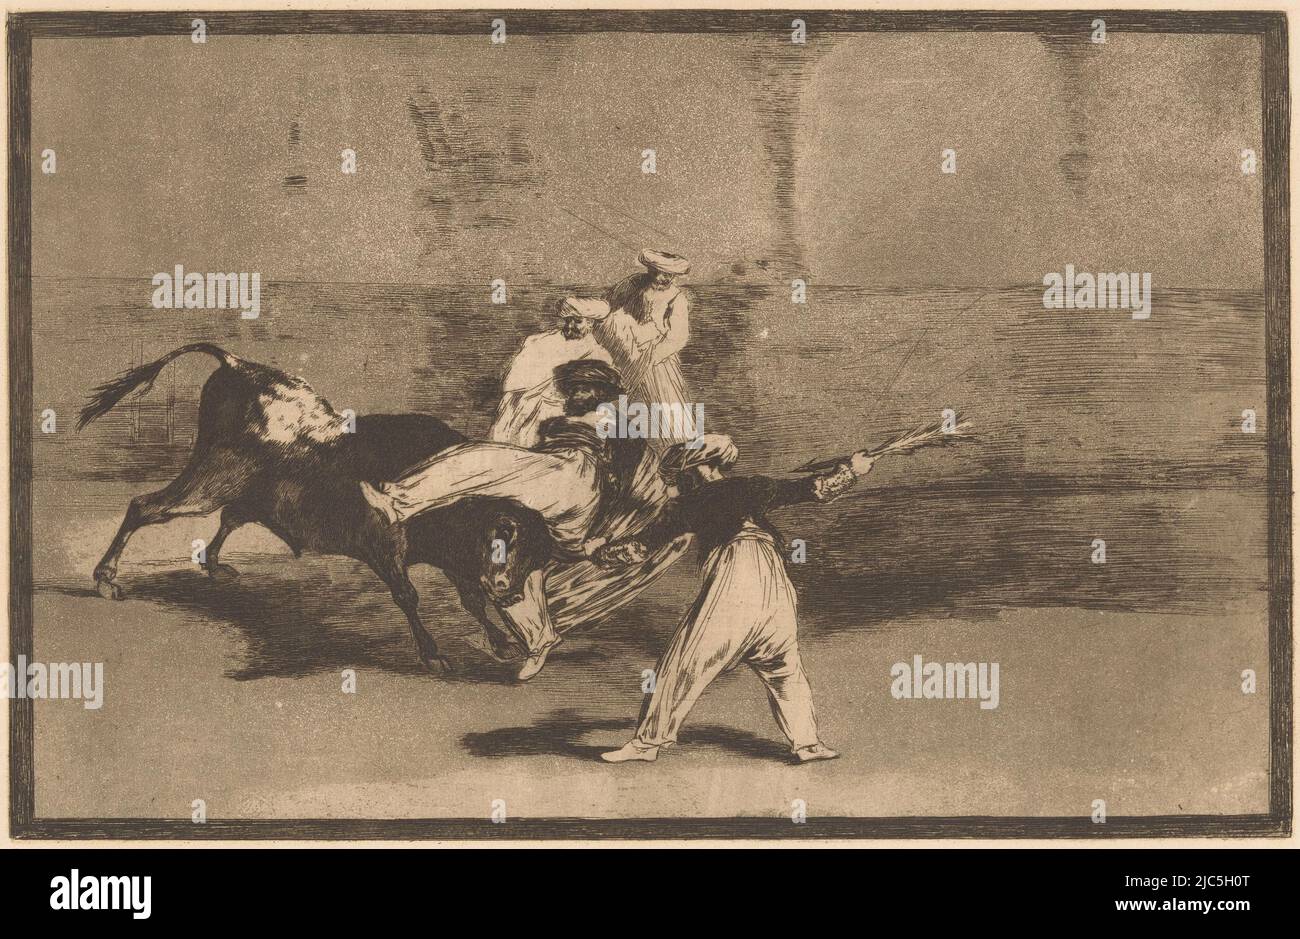 A bullfighter (torero) in Moorish dress is taken on the horns by a bull in an arena. Another bullfighter holds the bull by the horn and has a banderilla in his other hand. In the background two figures. Numbered upper right: 8., Bull is seized by bullfighters Cogida de un Moro estando en la plaza Bullfighting (series title) La Taureaumachie (series title) La Tauromaquia (series title), print maker: Francisco de Goya, publisher: Eugène Loizelet, print maker: Spain, publisher: Paris, 1876, paper, etching, h 245 mm × w 352 mm Stock Photo